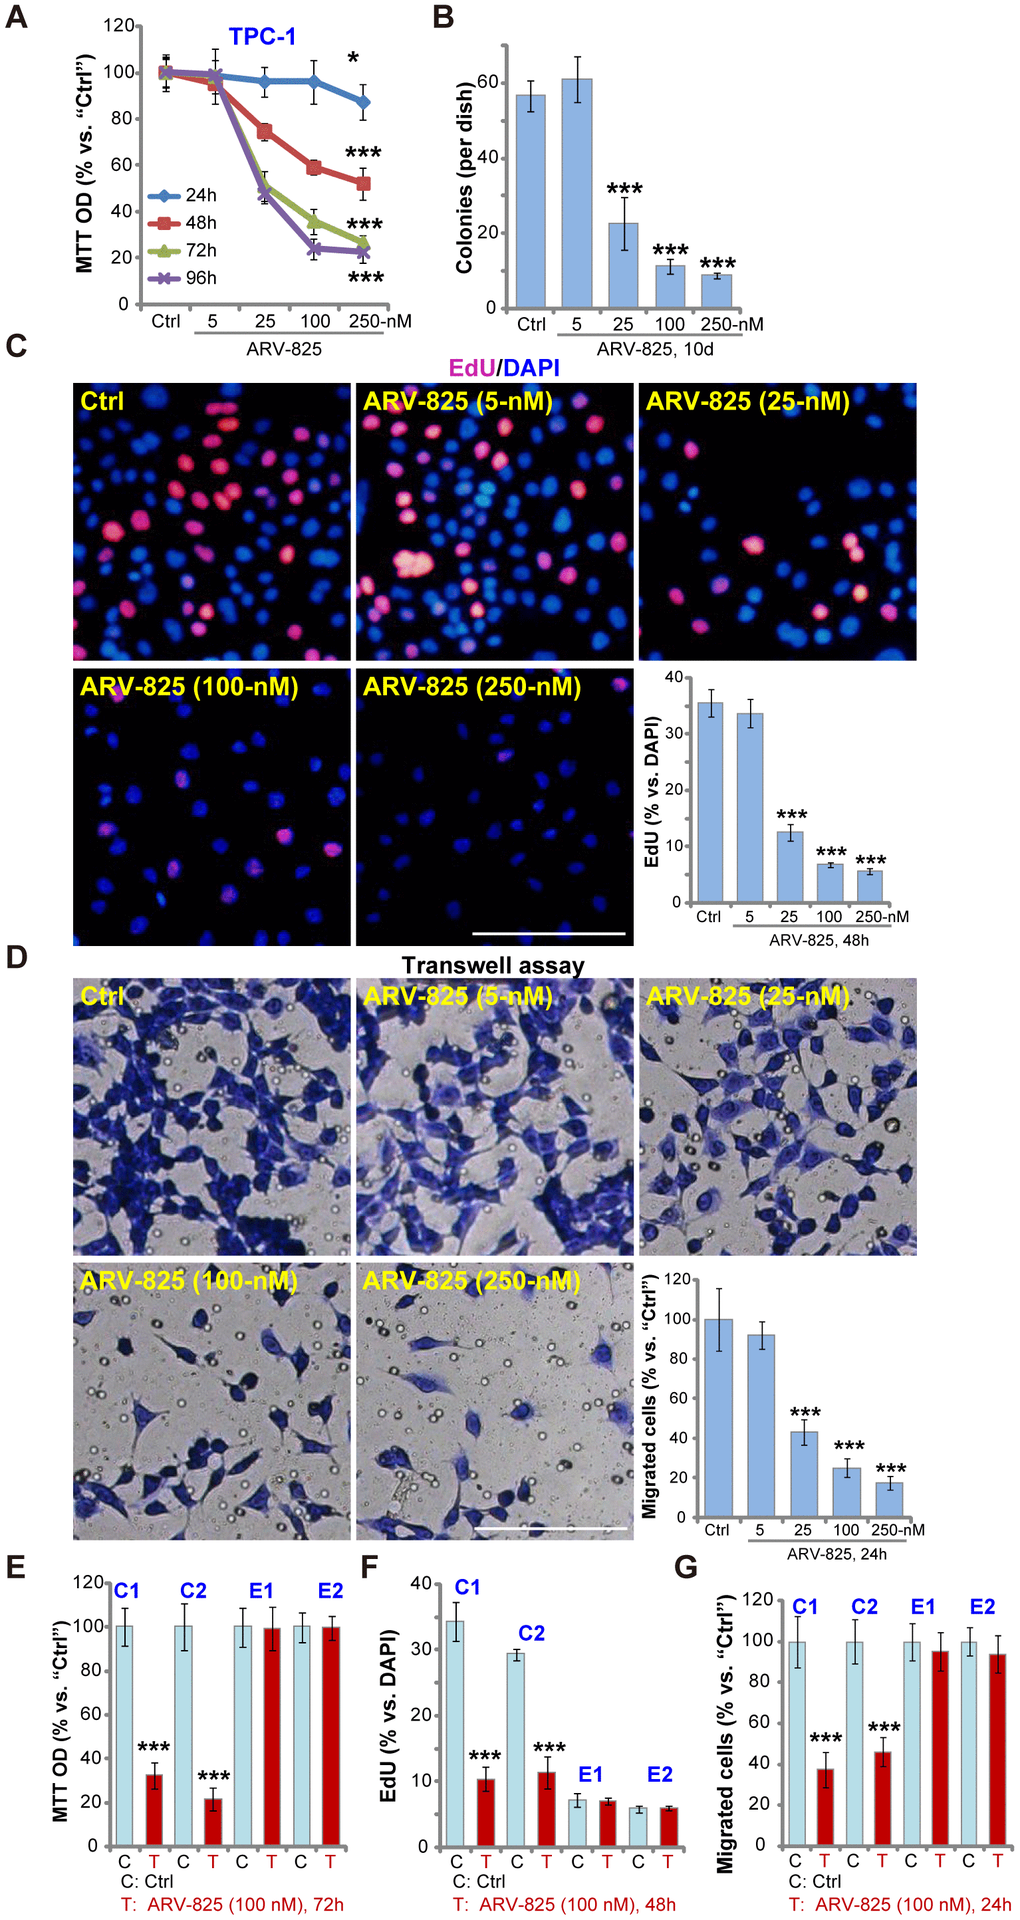 ARV-825 inhibits human thyroid carcinoma cell viability, proliferation and migration. TPC-1 cells (A–D), the primary human thyroid carcinoma cells (“C1”/“C2”, E–G) or the primary human thyroid epithelial cells (“E1”/“E2”, E–G) were left untreated (“Ctrl”, same for all Figures) or treated with ARV-825 (5-250 nM). Cells were further cultured in complete medium for indicated time periods, cell viability (MTT OD, A and E), colony formation (B), cell proliferation (EdU incorporation, C and F) and migration (“Transwell” assays, D and G) were tested. Data were presented as mean ± standard deviation (SD, n=5) (same for all Figures). *p vs. “Ctrl” group. ***p vs. “Ctrl” group. The experiments were repeated three times, with similar results obtained. Bar= 100 μm (C and D).